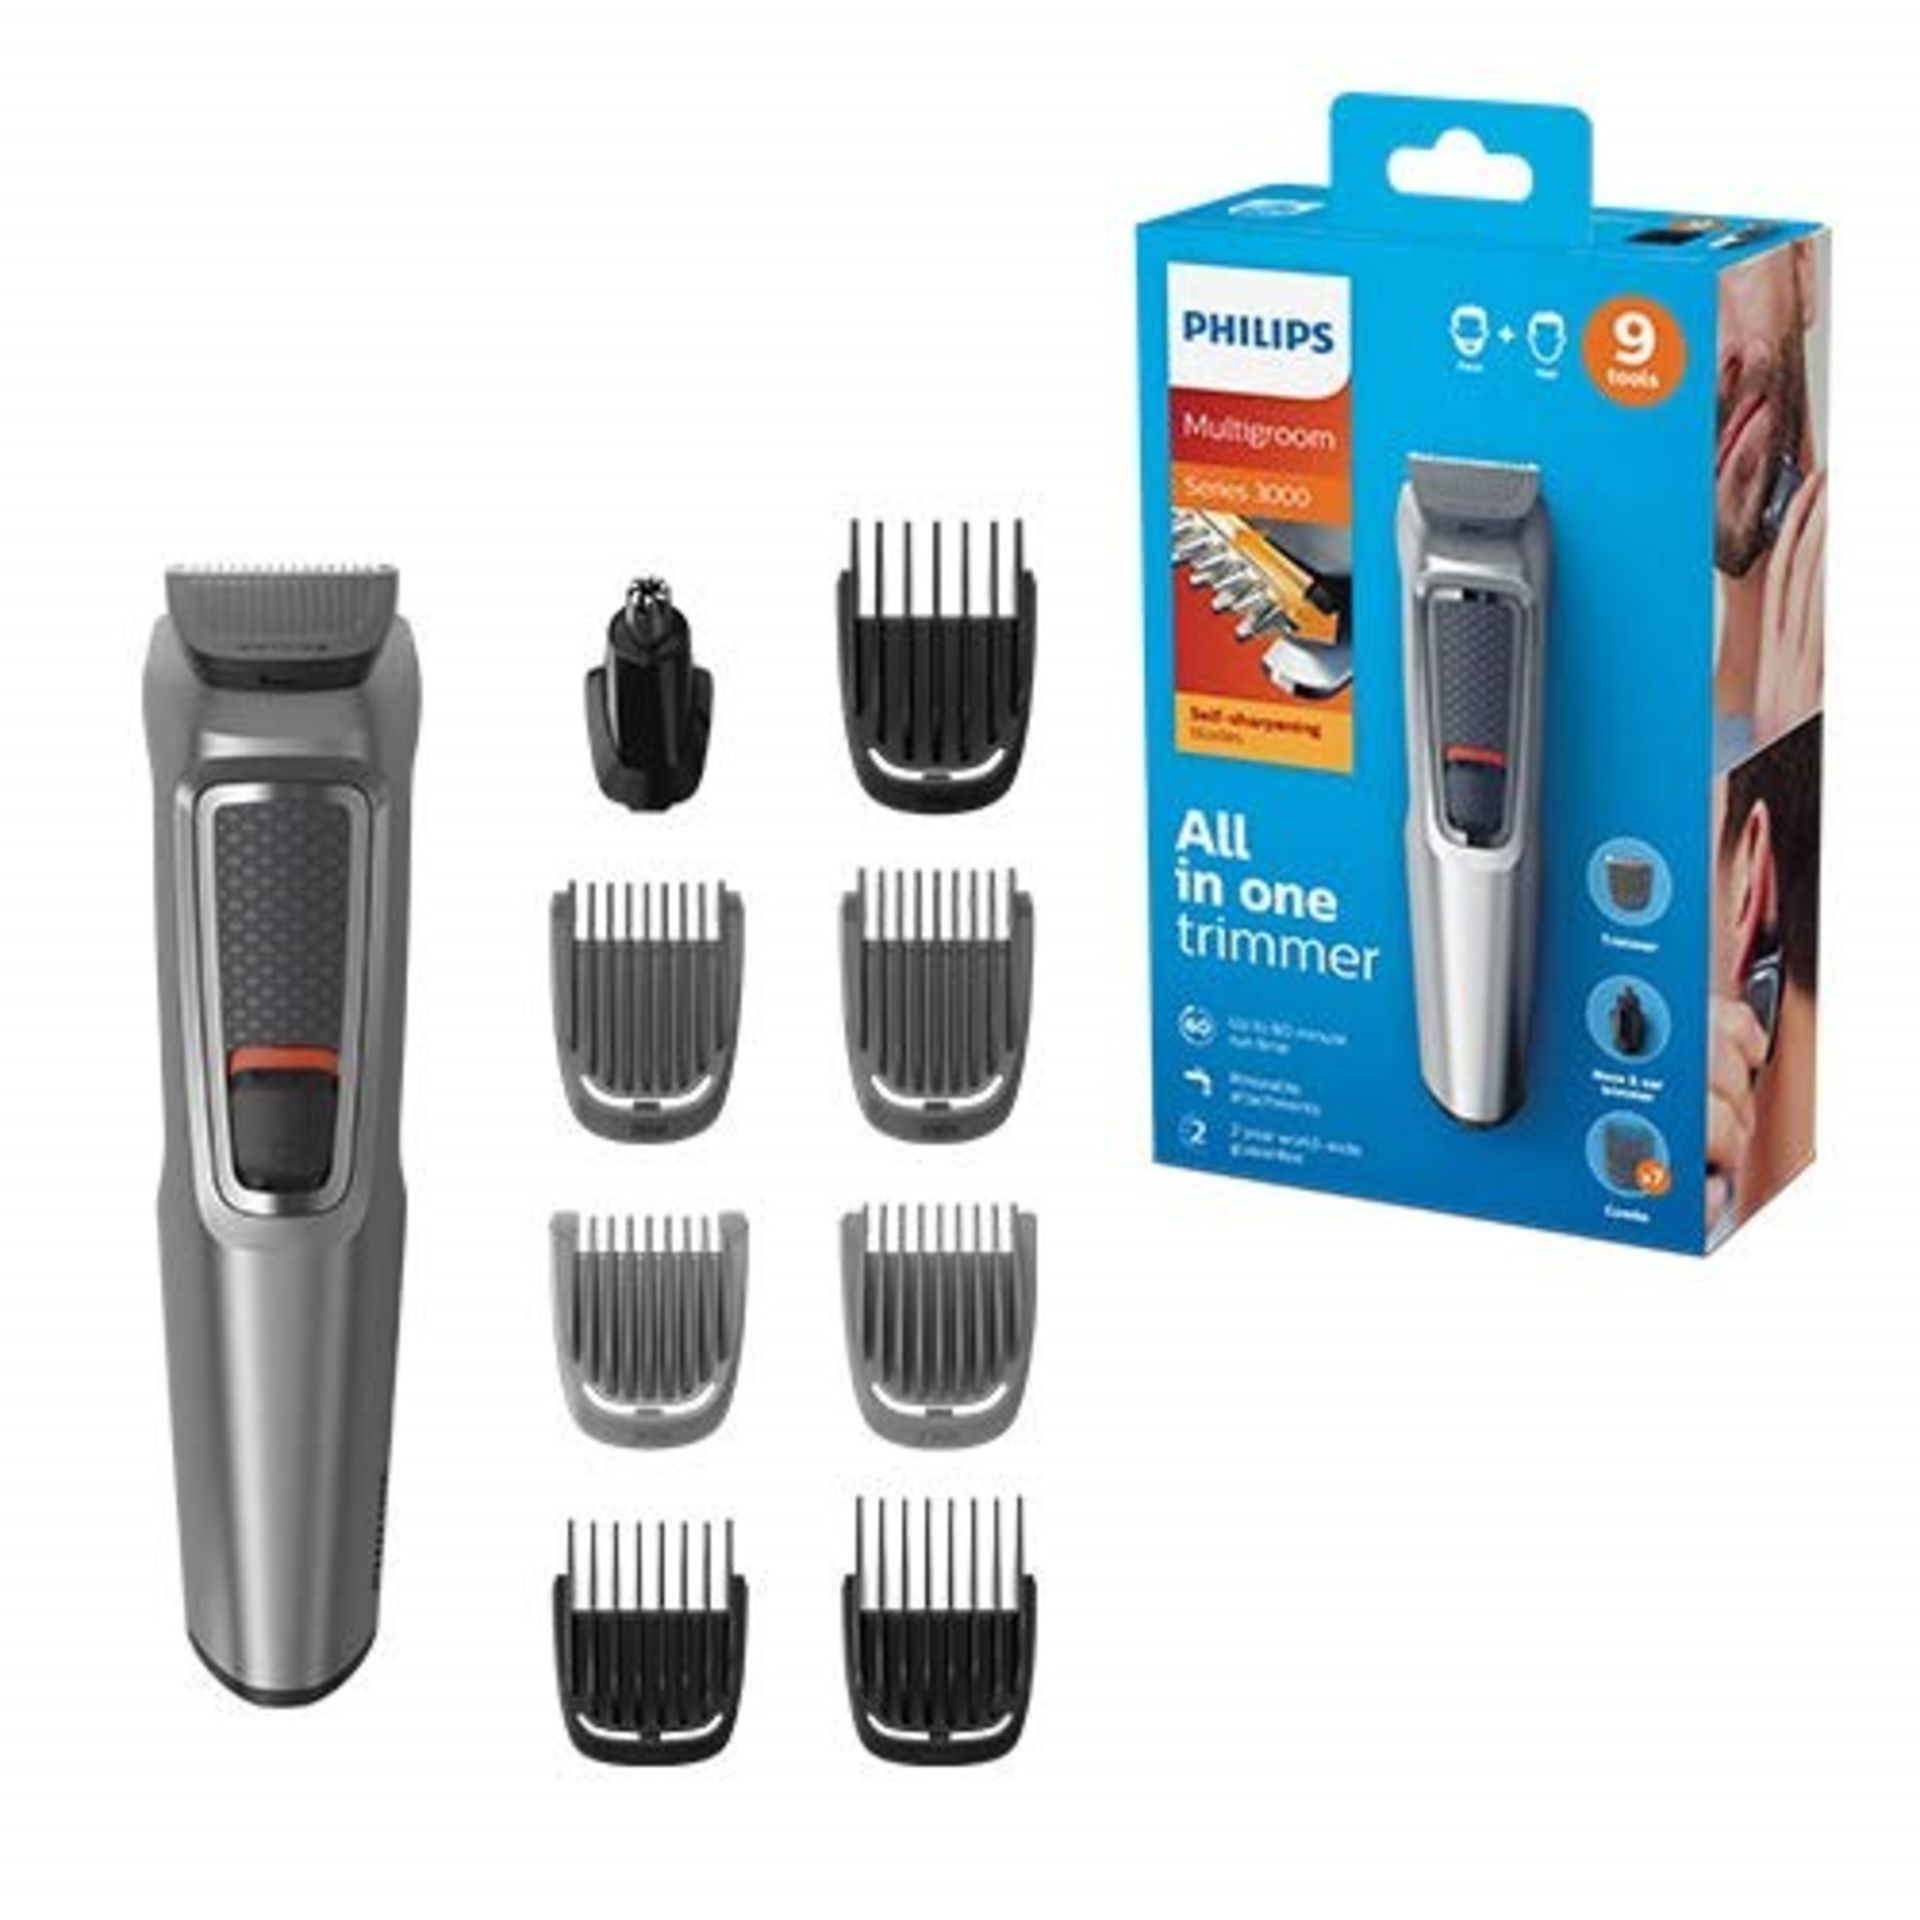 Philips 9-in-1 All-In-One Trimmer, Series 3000 G